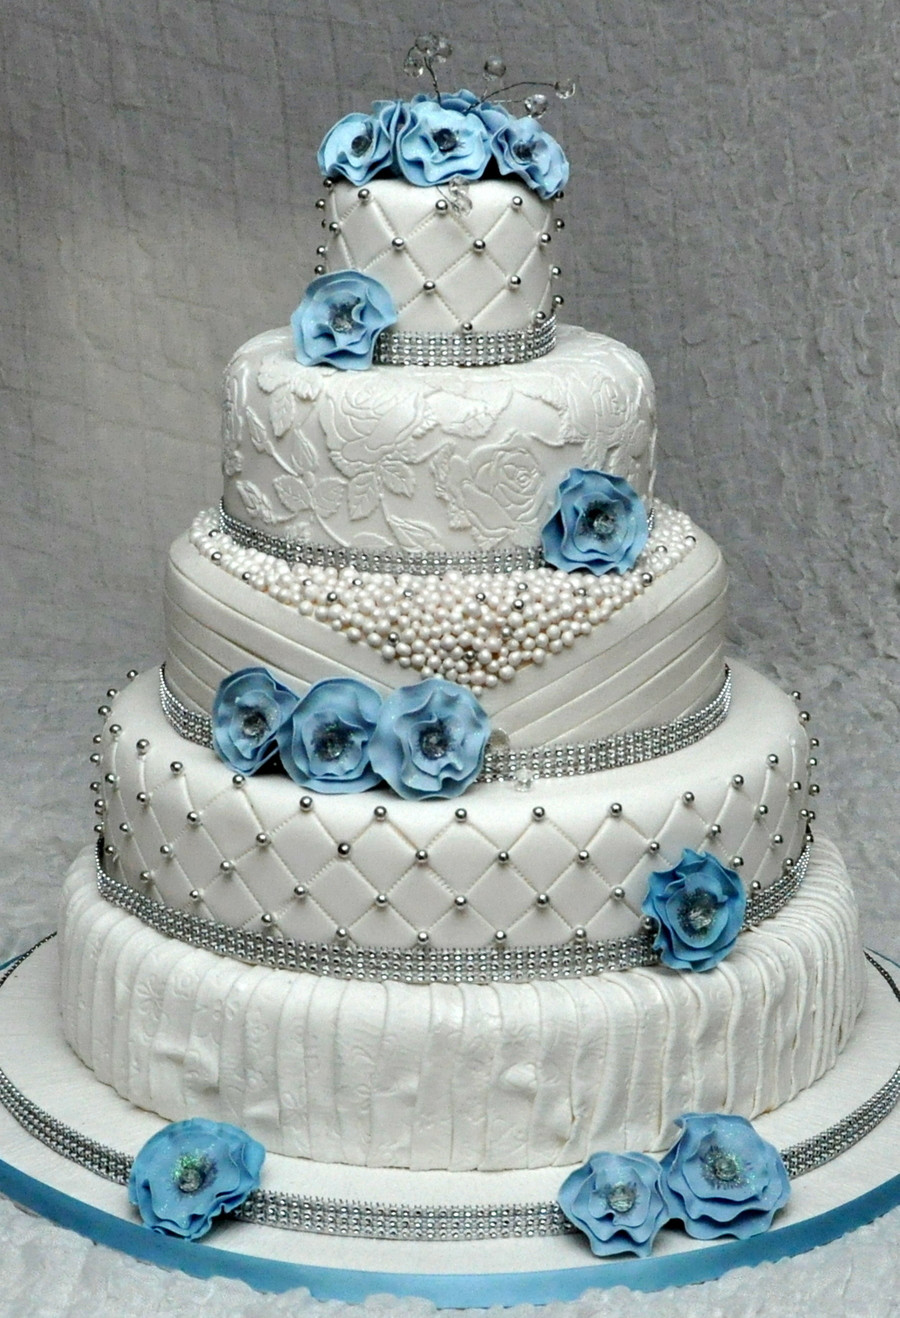 Tier Wedding Cakes
 5 Tier Wedding Cake With Edible Pearls And Lace Decorated